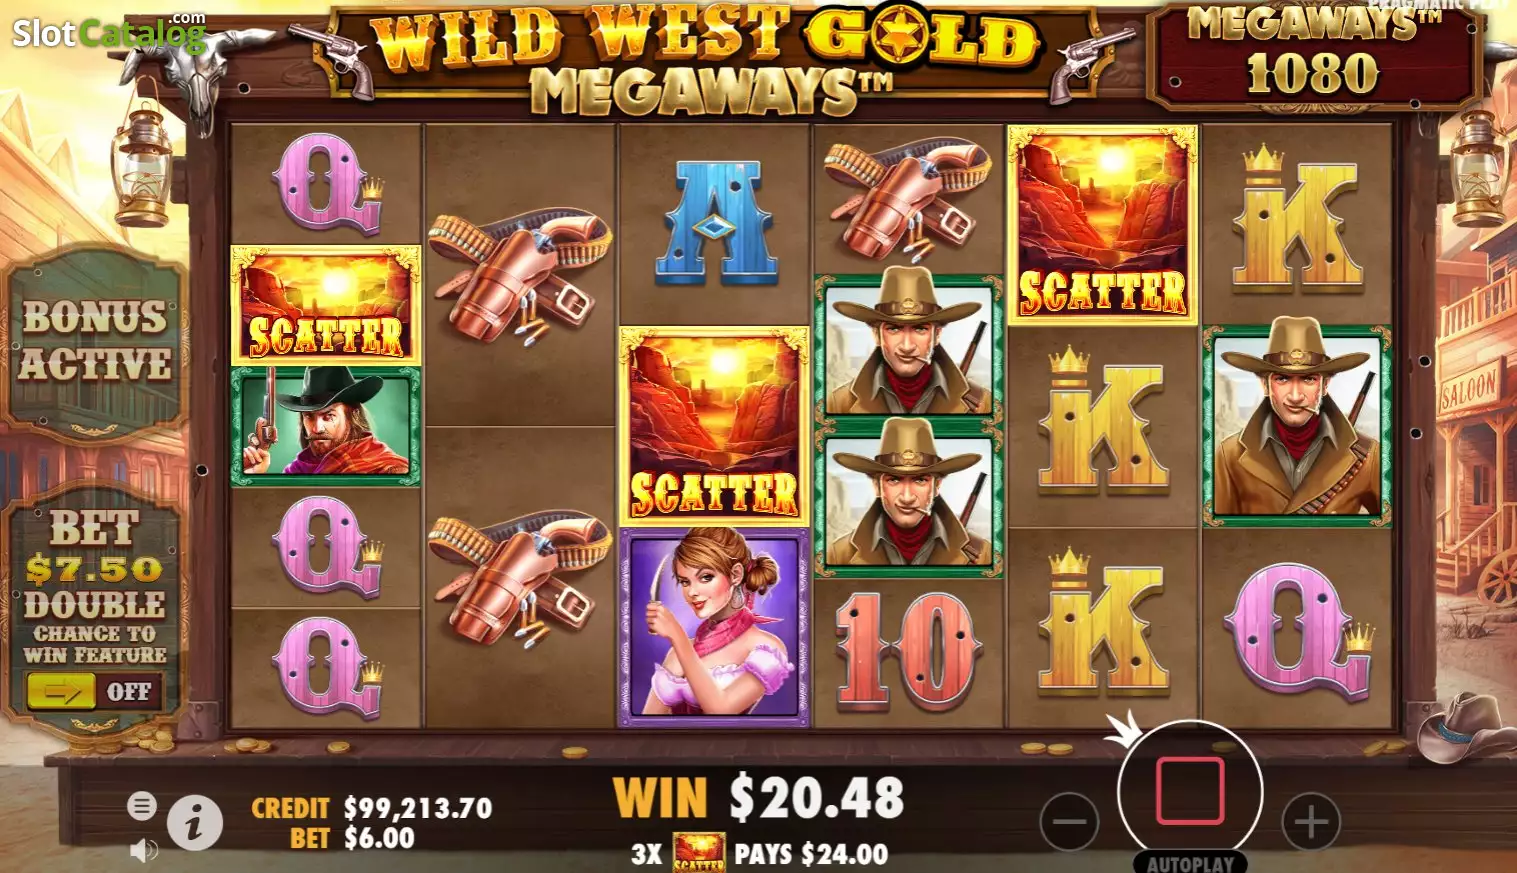 Wild West Gold Megaways Slot - Free Demo & Game Review